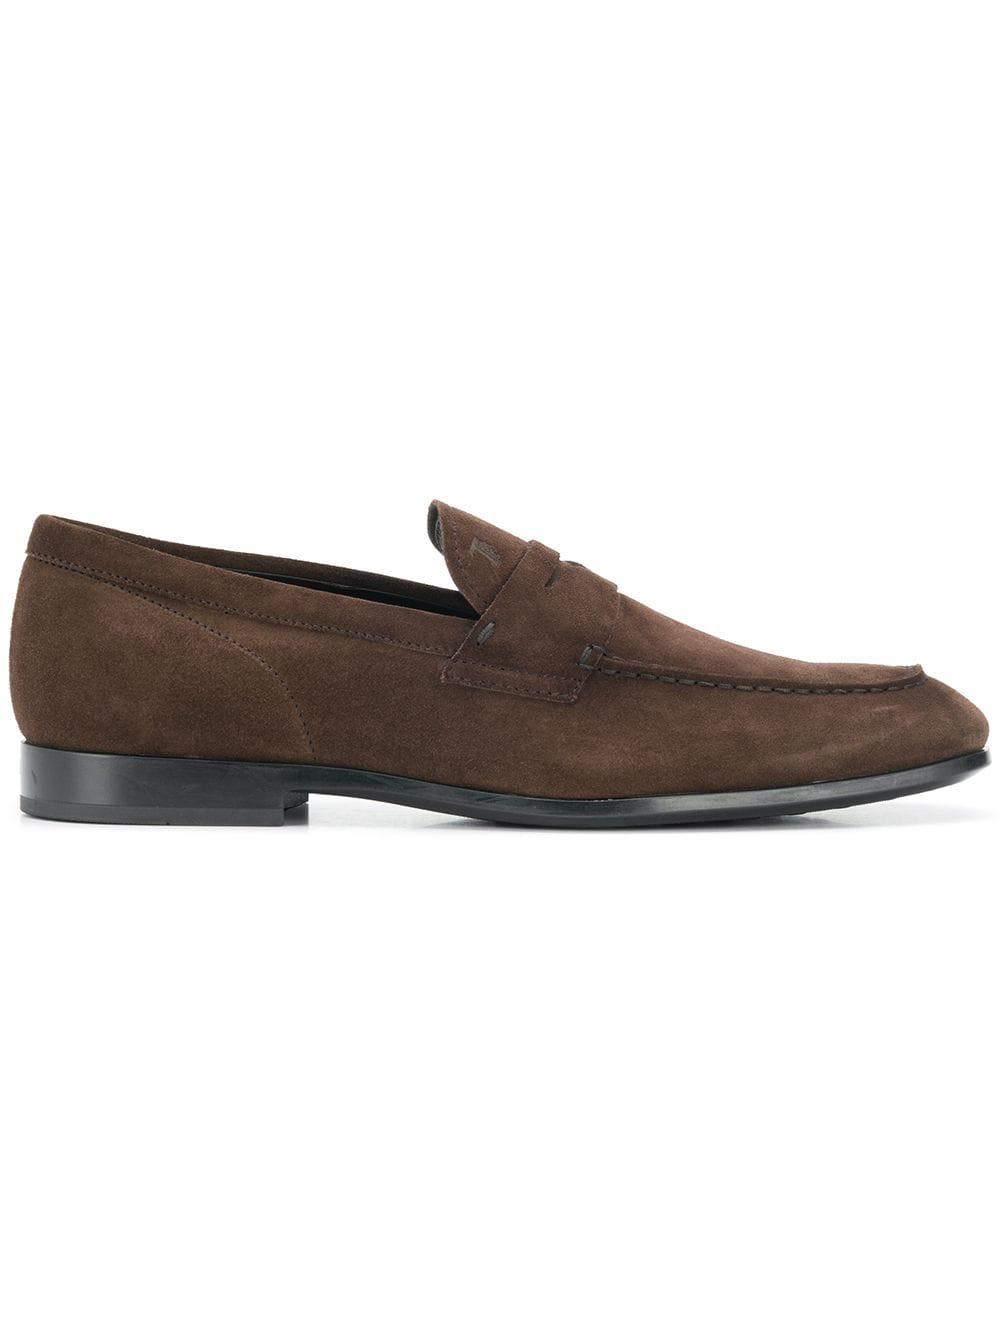 for Men Brown Tods Raffia-trimmed Suede Loafers in Dark Brown Mens Shoes Slip-on shoes Loafers 